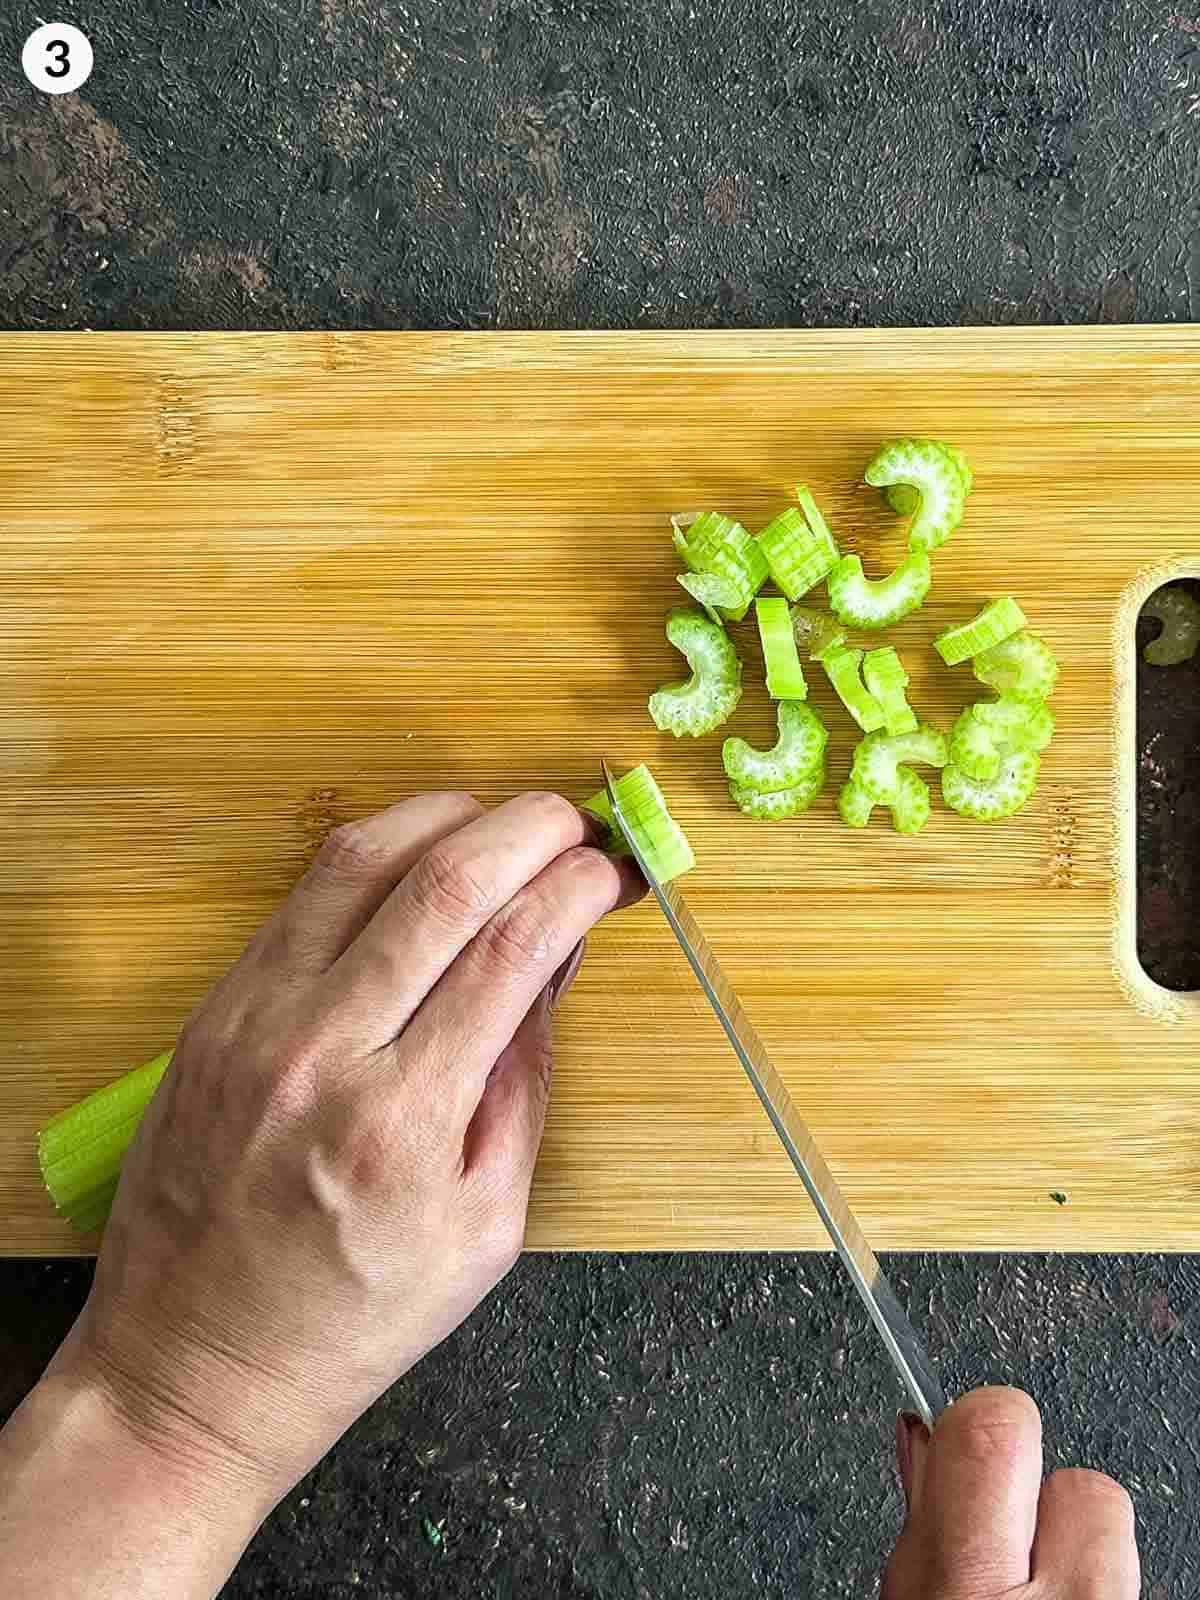 Chopping celery on a wooden board with a knife